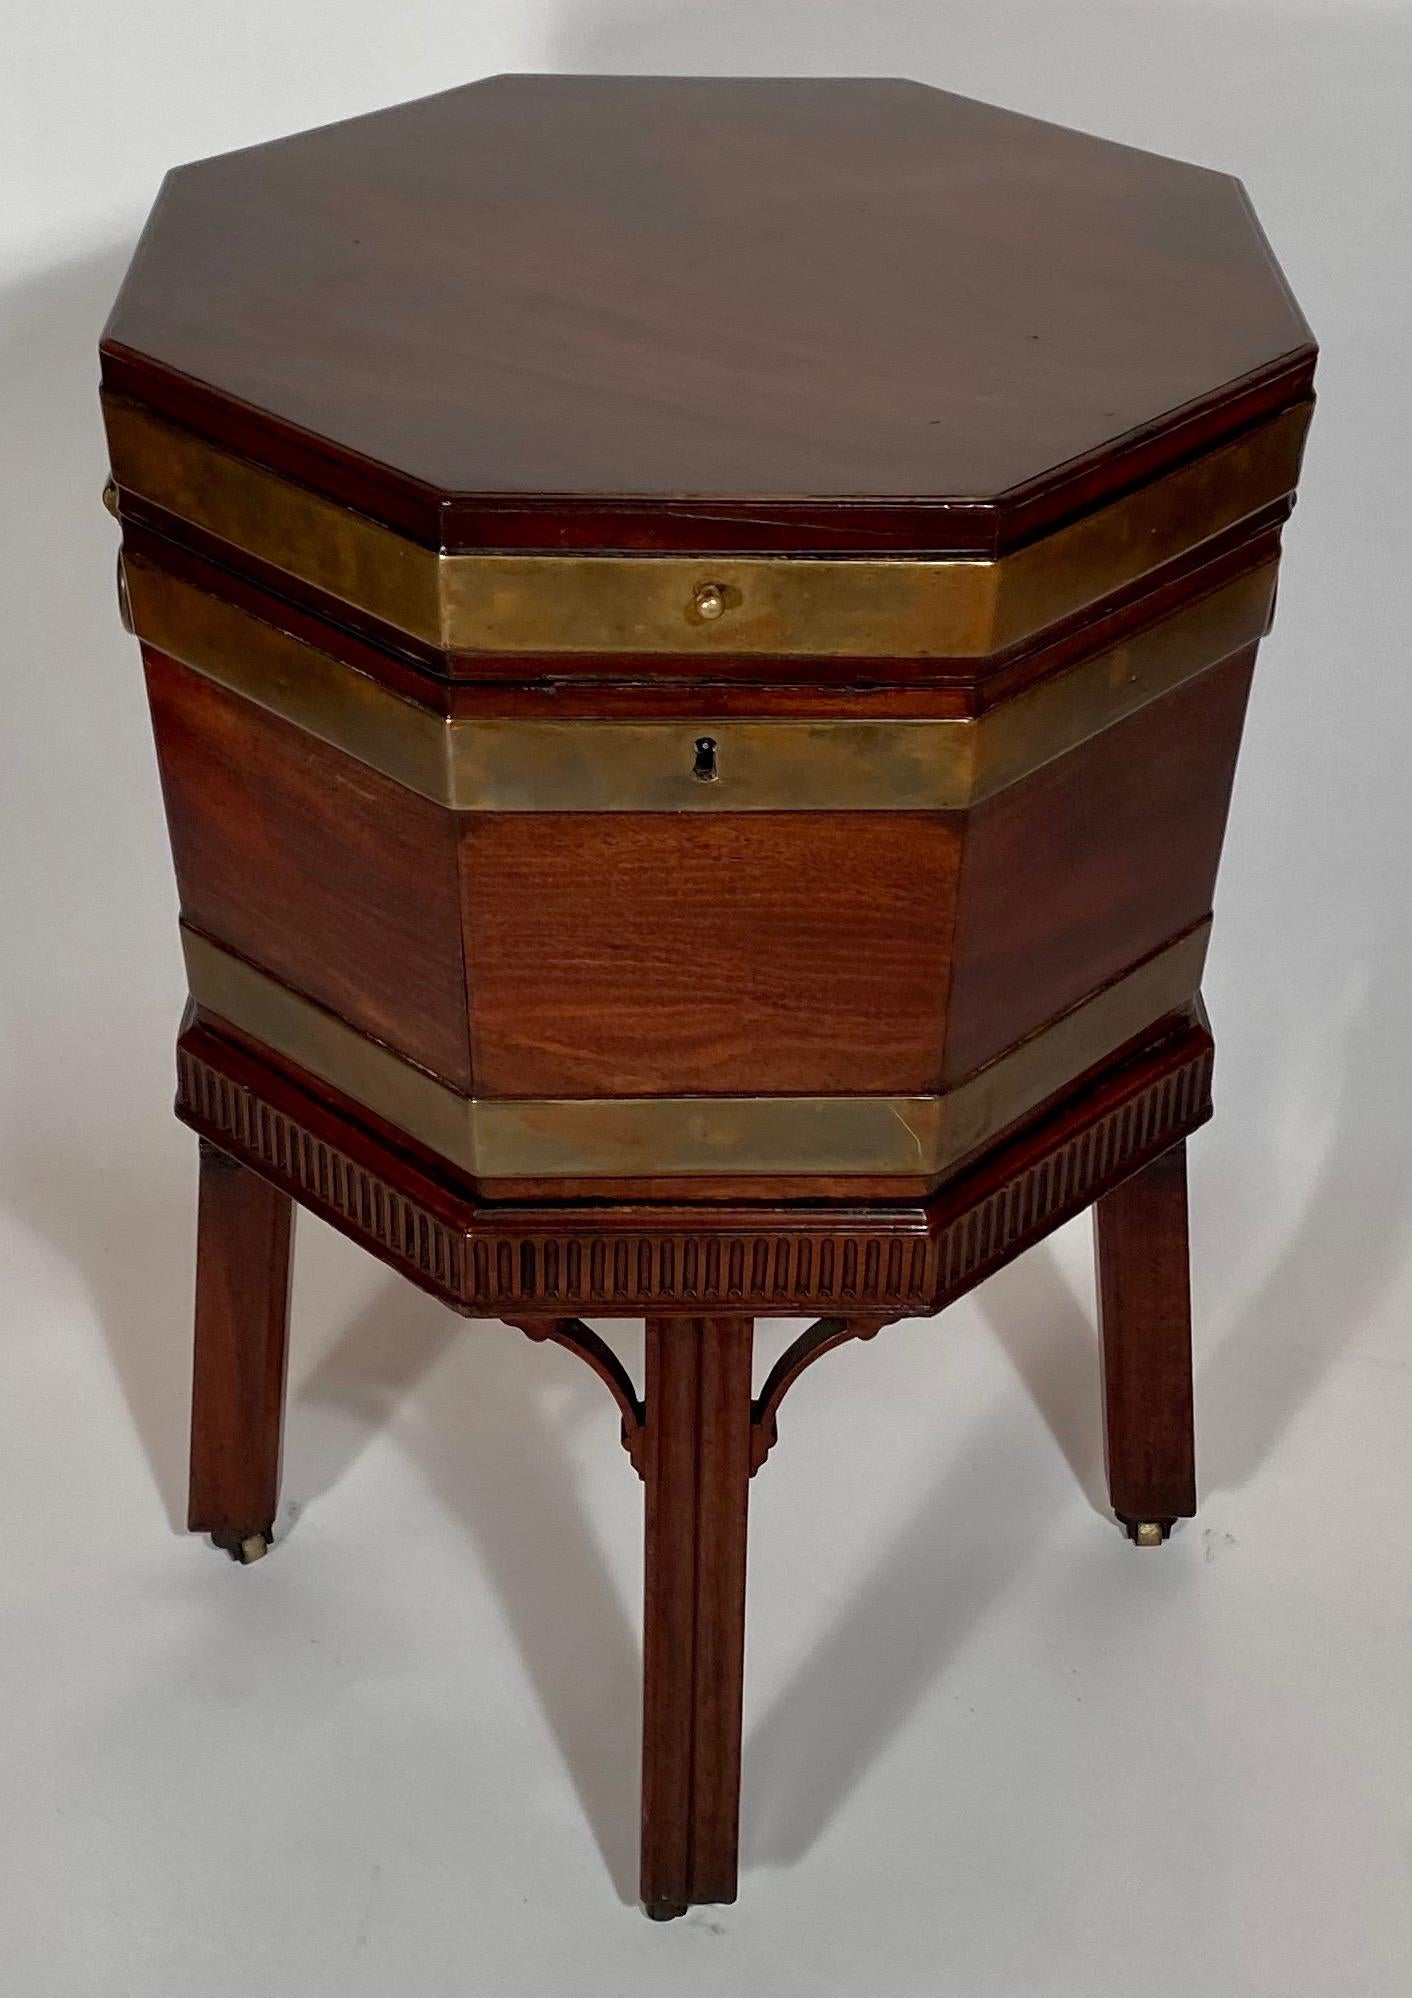 Antique Georgian mahogany cellarette, circa 1840. Used to store spirits - wine or whiskey- until they were used at a festive occasion.
 